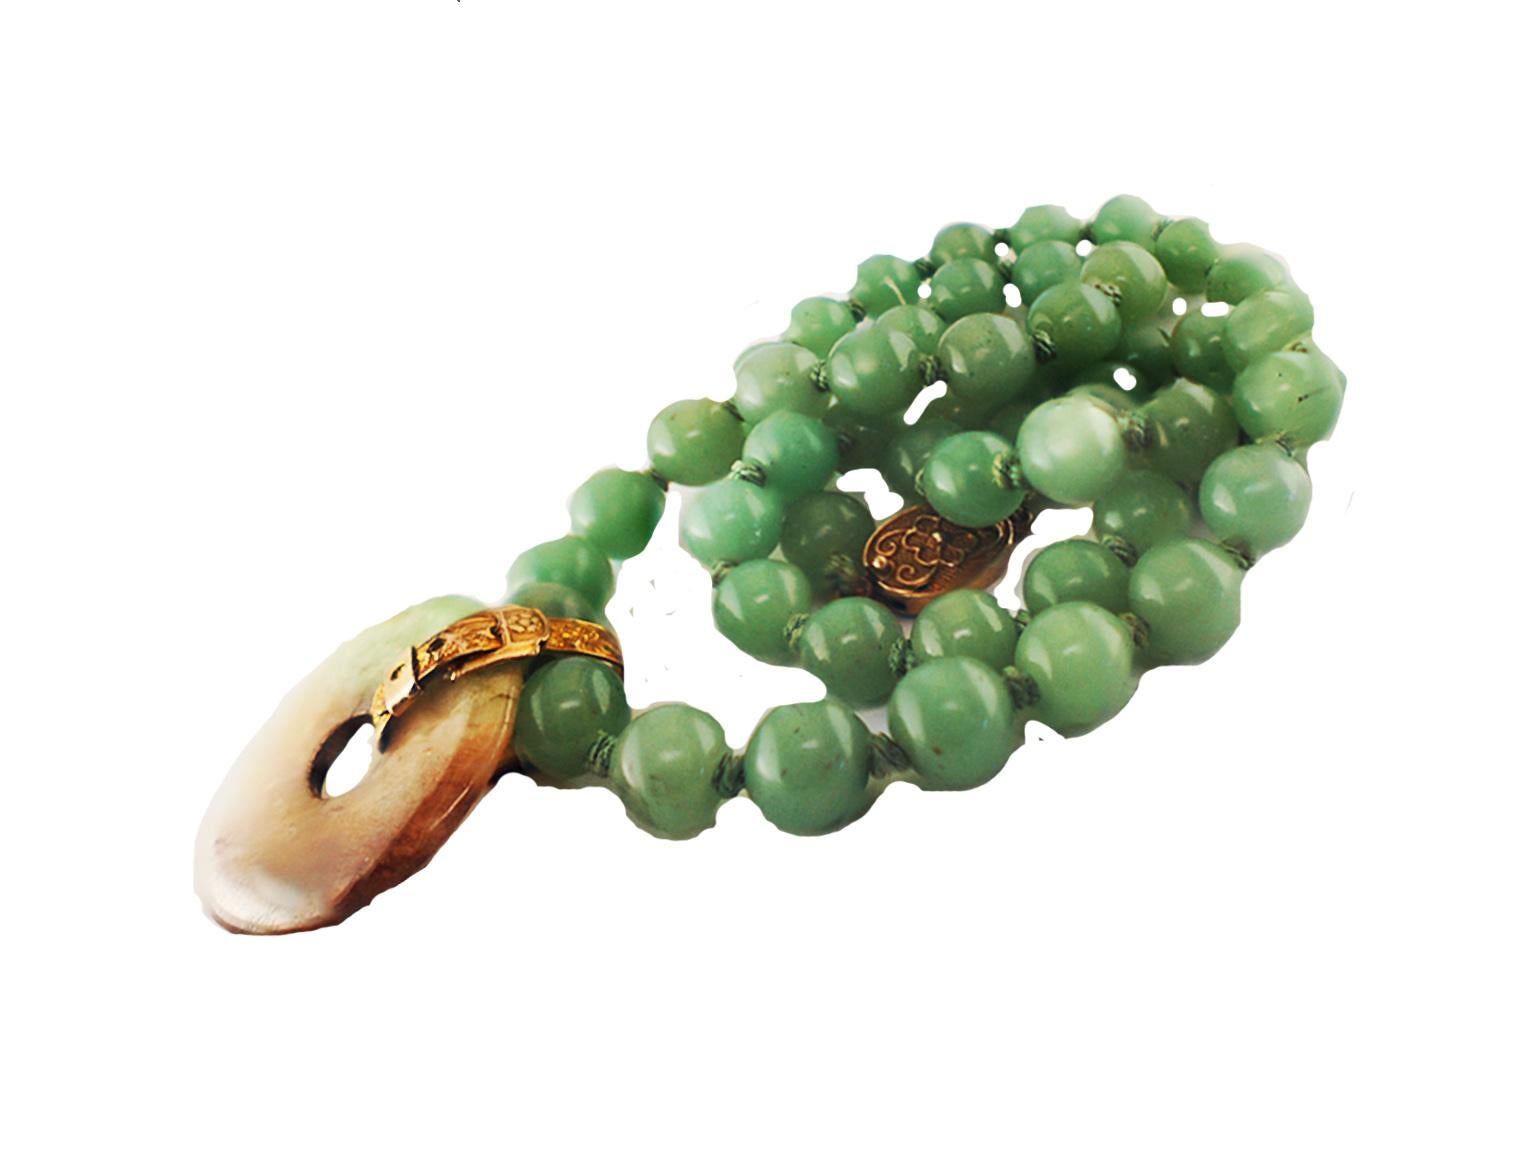 Chinese Jade Disk and Bead Necklace attached with a 14 Karat Yellow Gold buckle style ornament 
Retro, 1970's Pendant and Bead necklace displays a convex jade with marbled colors of Brown, Green and White.
The Jade is 1.25 inches in diameter 

The